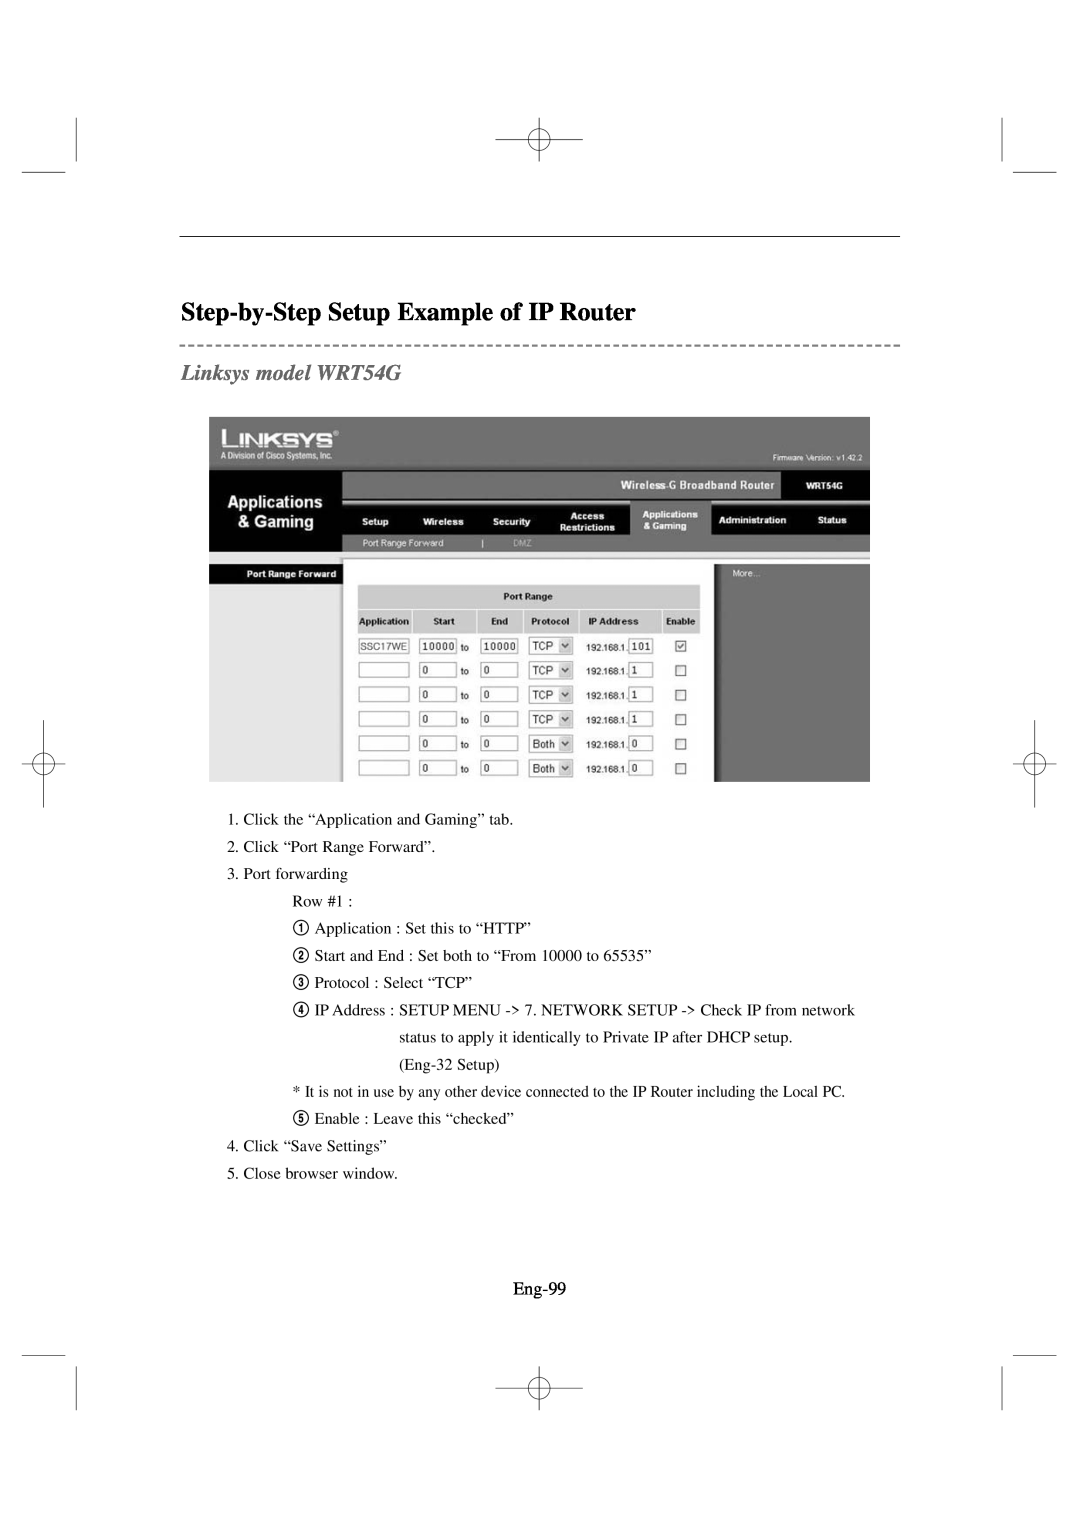 Samsung SSC17WEB manual Step-by-StepSetup Example of IP Router, Linksys model WRT54G 